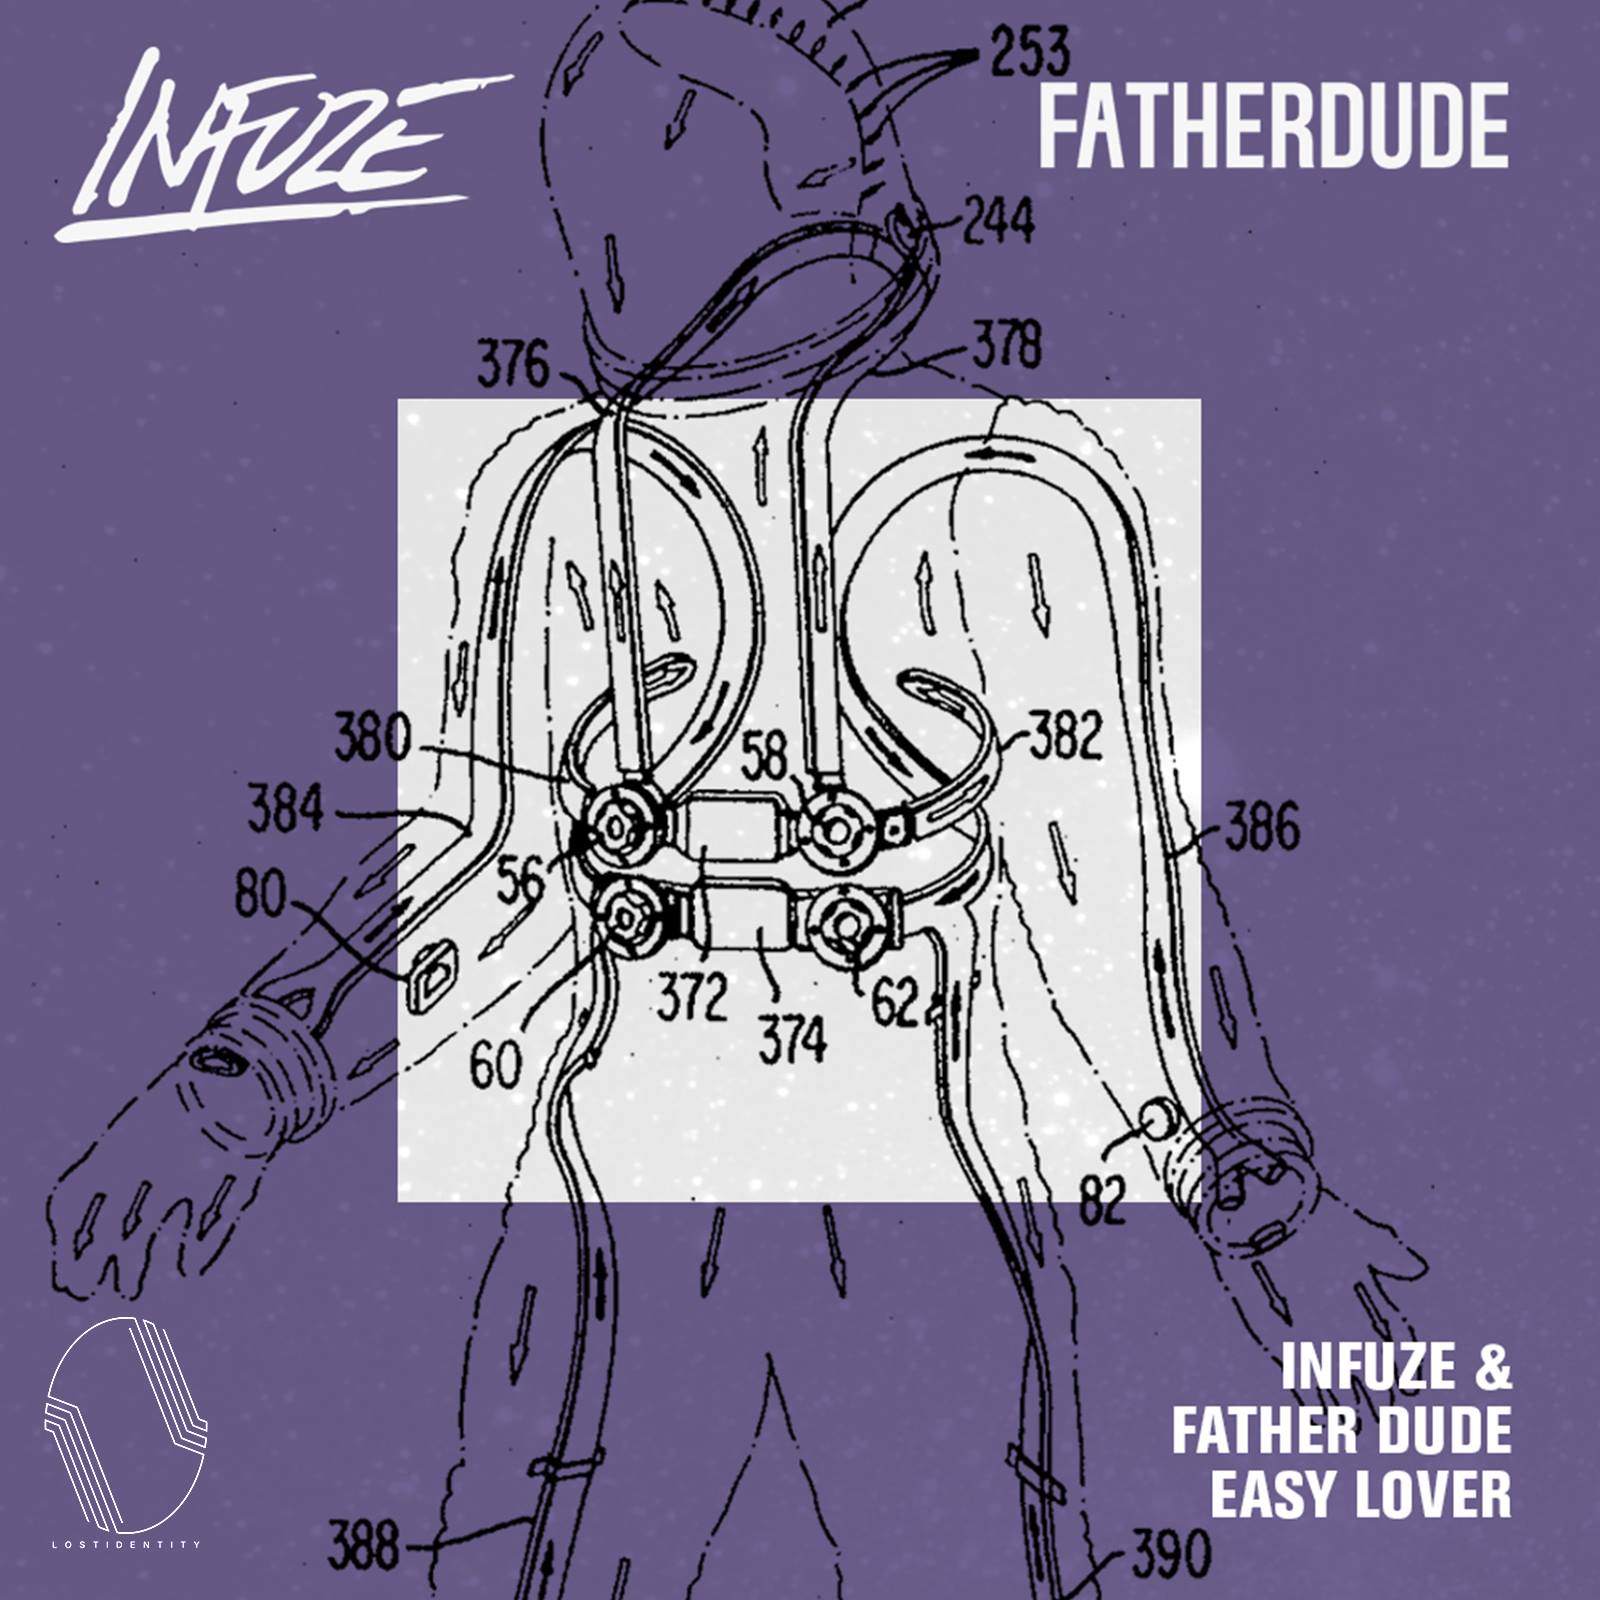 Infuze X Father Dude - Easy Lover | Stereofox Music Blog